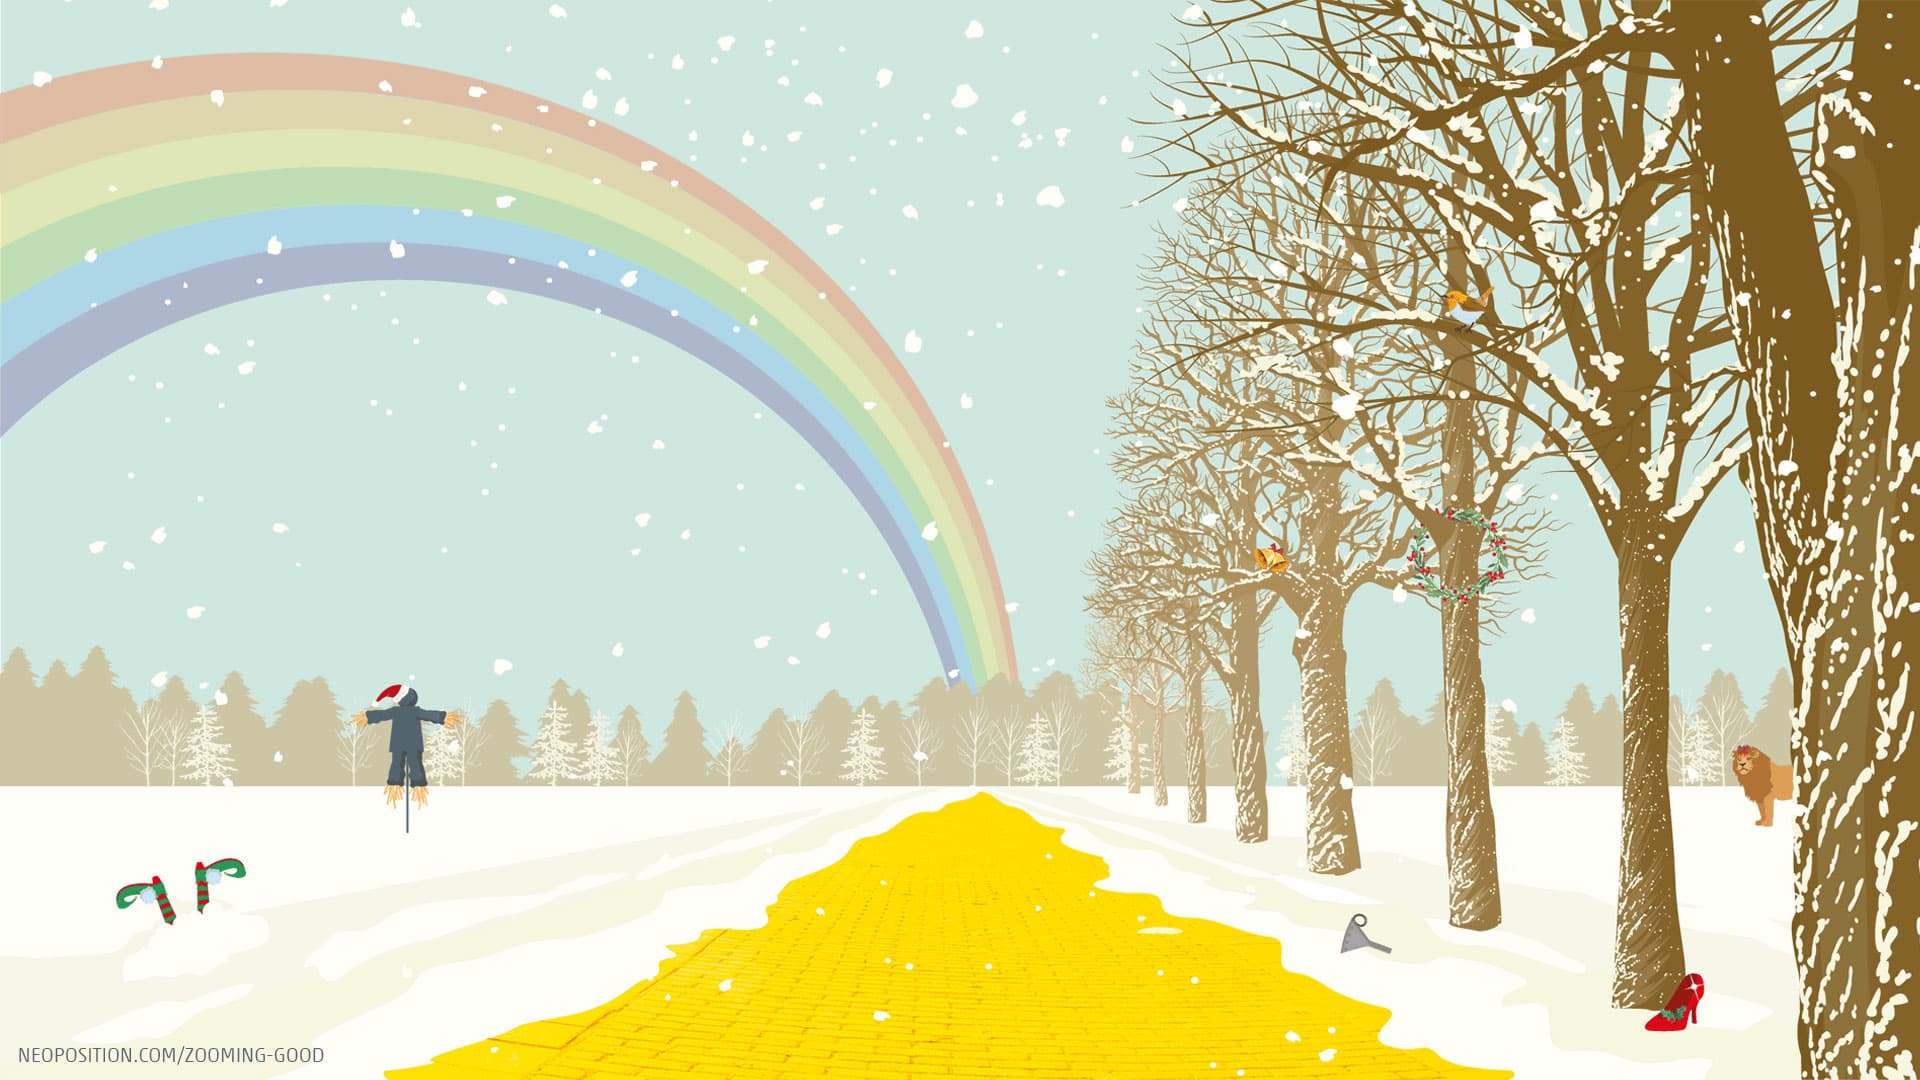 An Illustration of a snow scene with rainbow, yellow brick road and Wizard of Oz style characters for the Festive Fairytale Inspired Zoom Background Designs